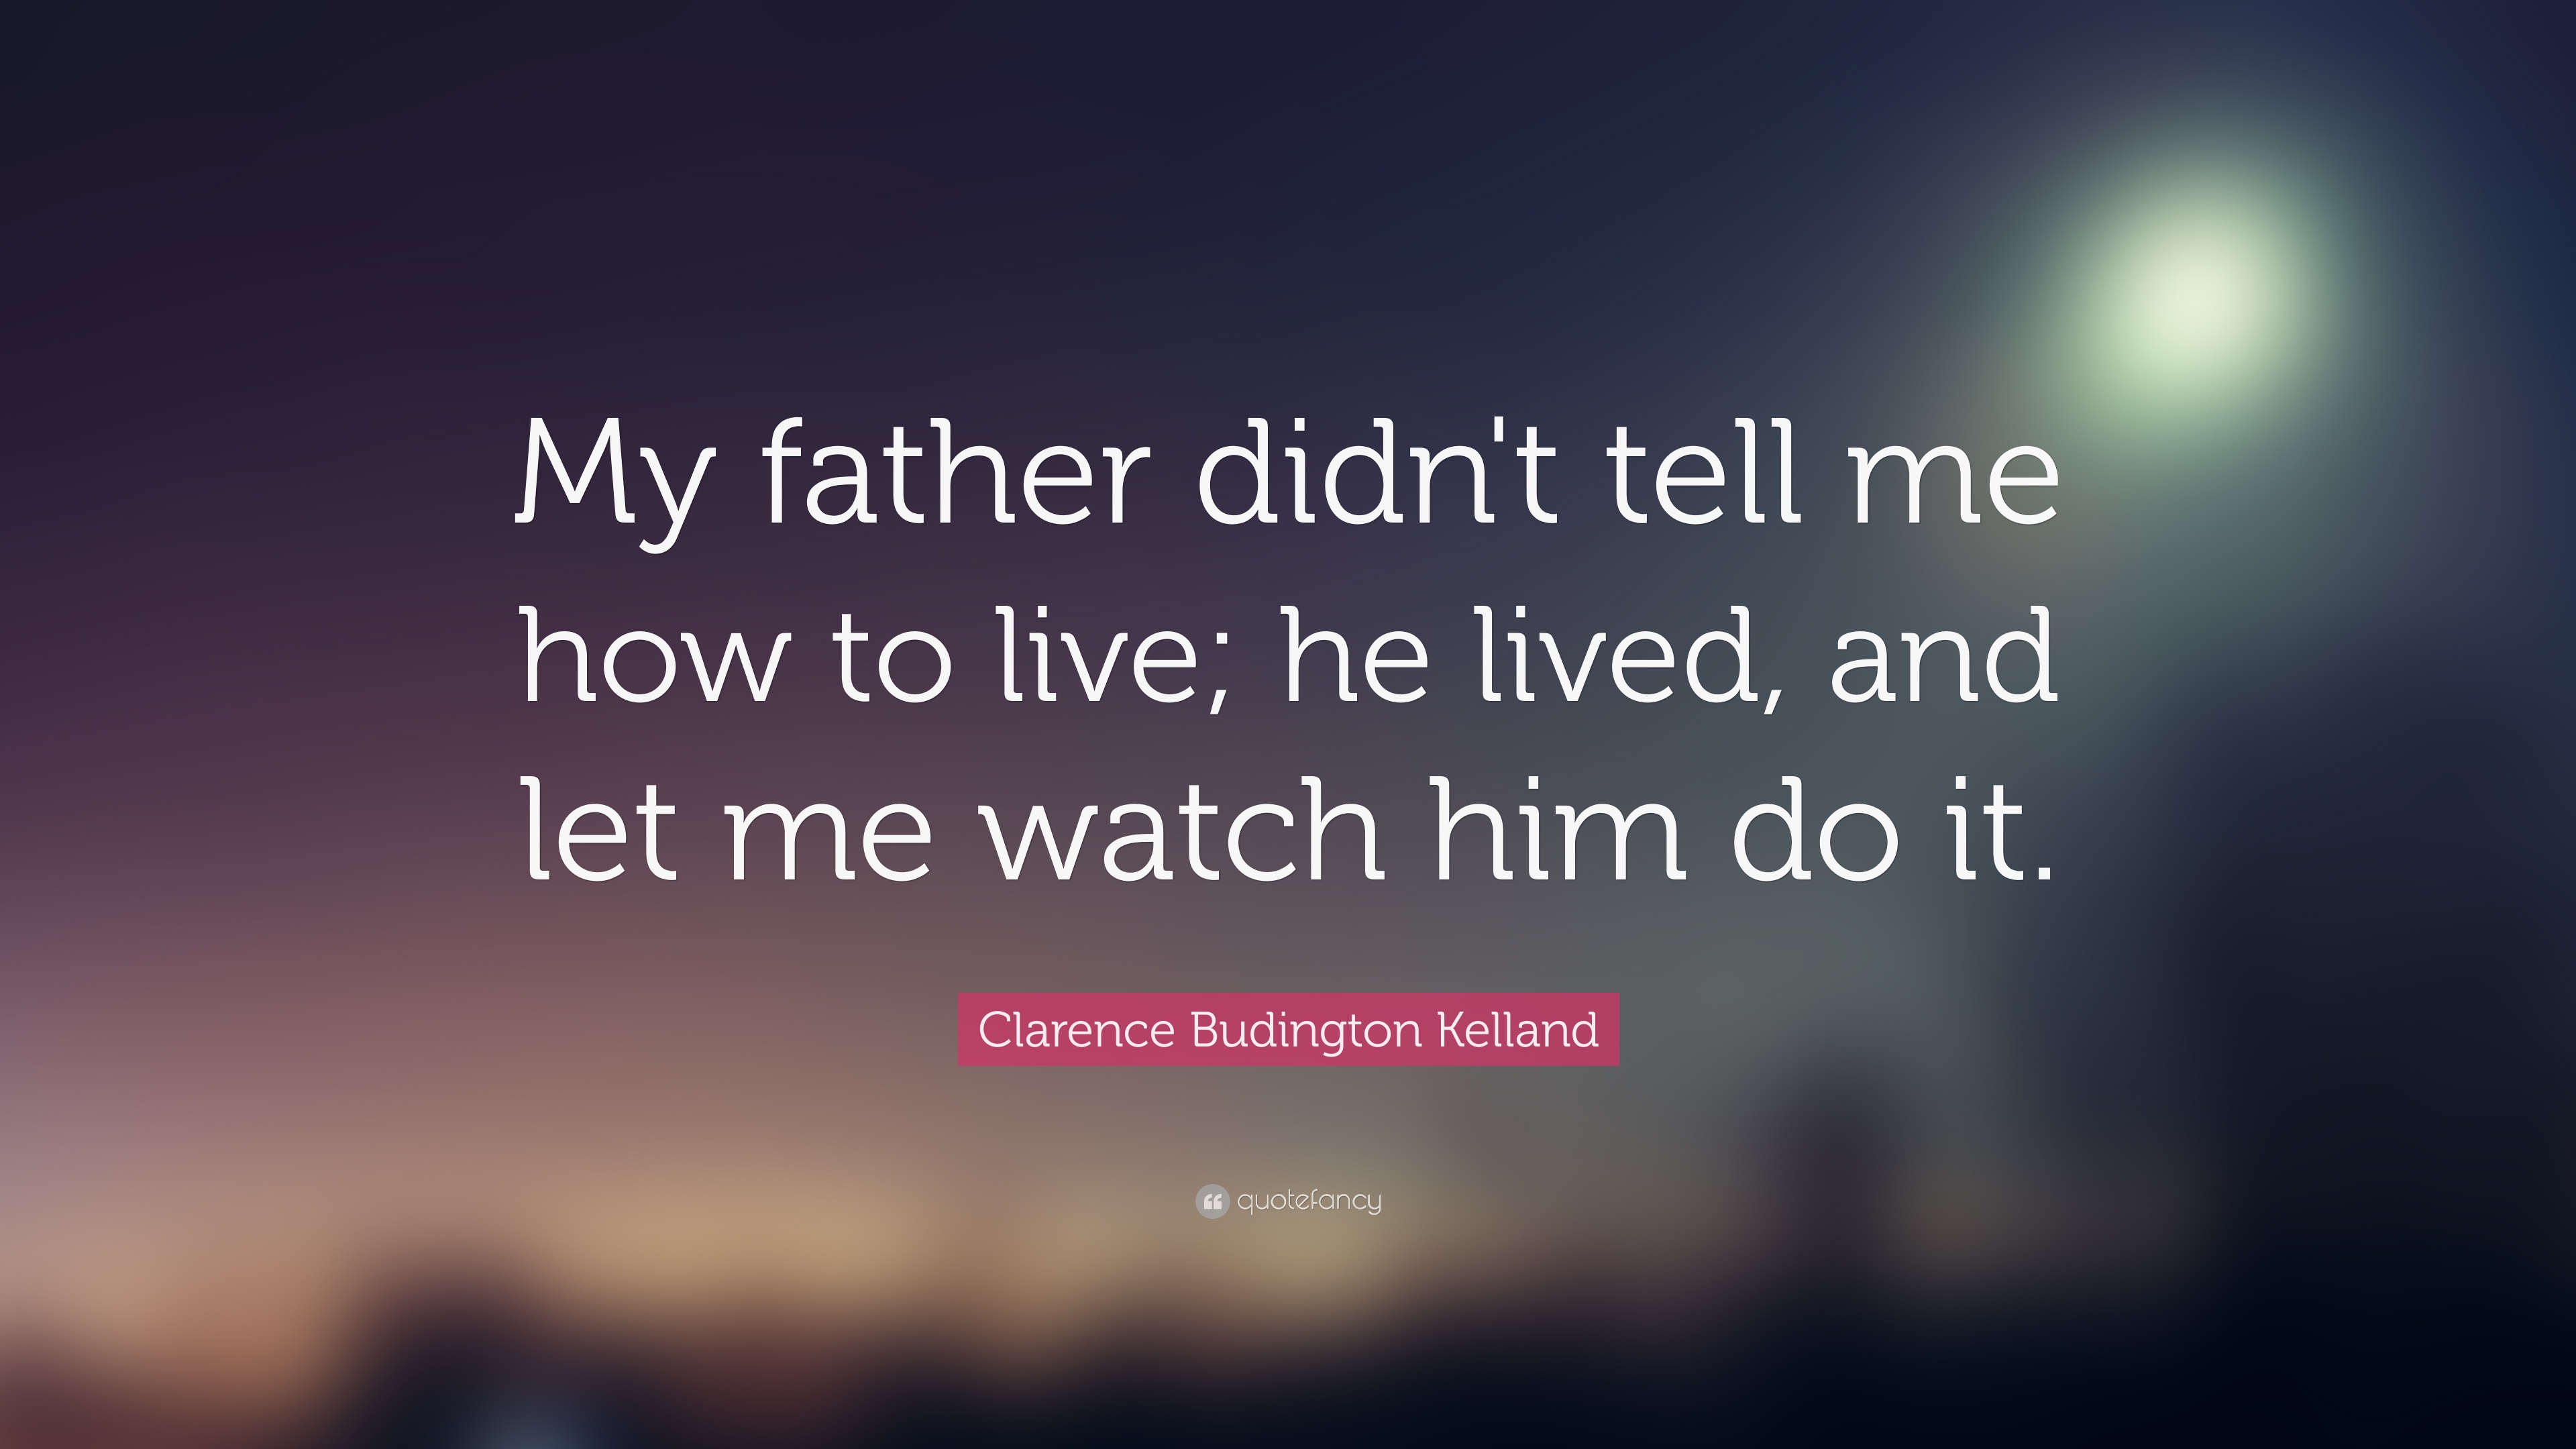 my father did’t tell me to live he lived and let me watch him do it. clarence budington kelland